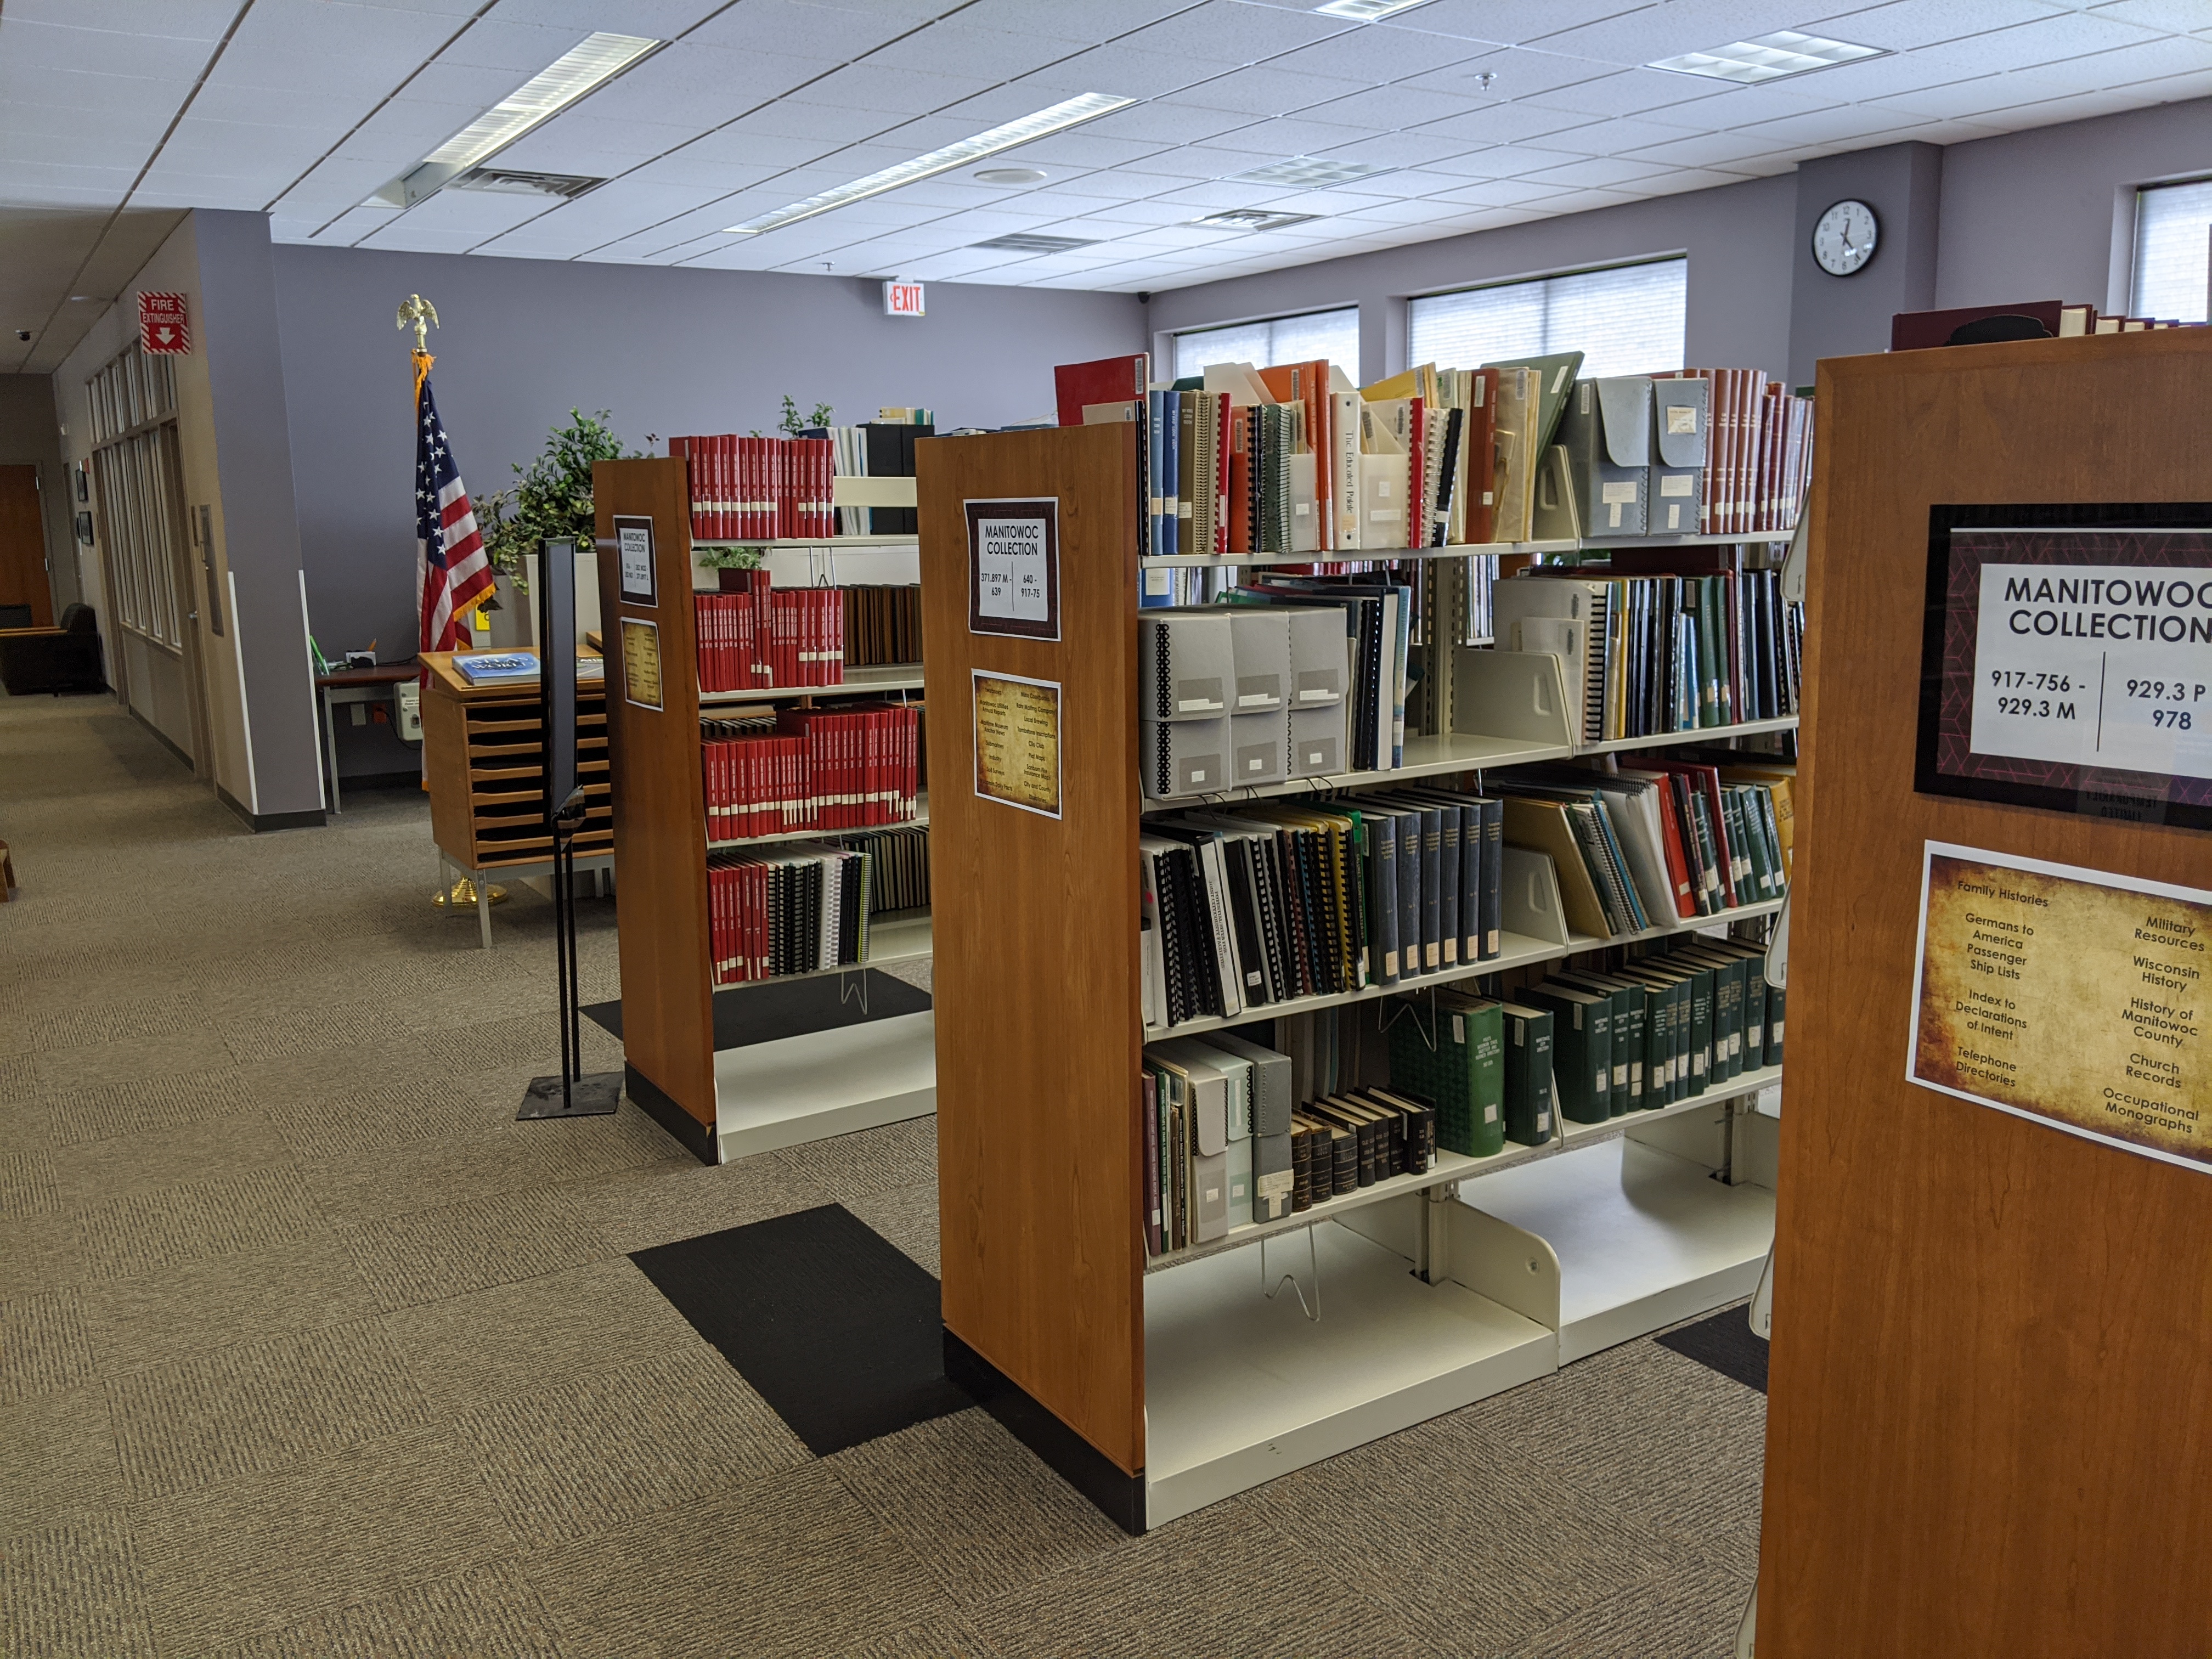 Local history collection shelving